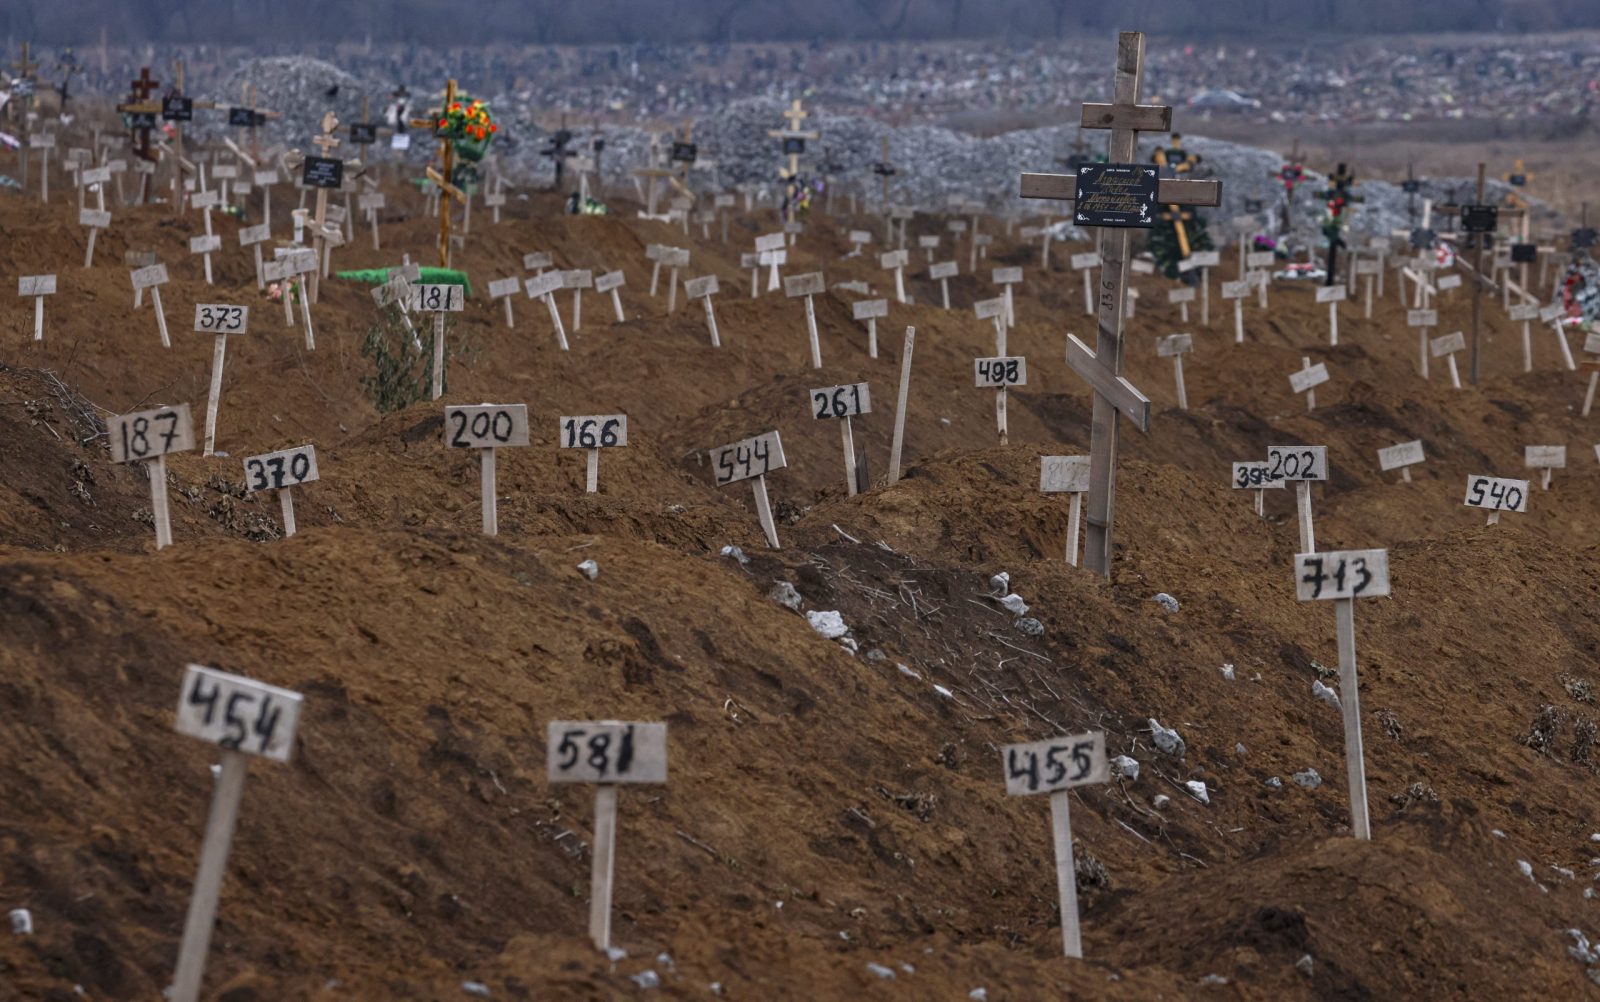 epa10360629 Numbers mark the graves of unidentified local residents who were killed during fights in the city on the cemetery in Mariupol, Ukraine, 10 December 2022 (issued 11 December 2022). An estimate 250,000 inhabitants have left the city, about 300,000 still remain. During the hostilities, up to 70 percent of the housing stock of Mariupol was destroyed and about 5,000 civilians were killed due to fighting and shelling, Konstantin Ivashchenko, the new mayor of the city, said. City authorities prepare residential buildings for winter and change all central heating systems in Mariupol, where by the end of the year at least 1,000 residential buildings, social and cultural facilities will be connected to heat, said Russian Deputy Prime Minister Marat Khusnullin. The government of the self-proclaimed Donetsk People's Republic (DPR) reported that 129,000 square meters of new housing will appear next year in Mariupol. More than 5,000 builders are working on the restoration of the city. Mariupol is expected to be completely rebuilt in three years.  EPA/SERGEI ILNITSKY